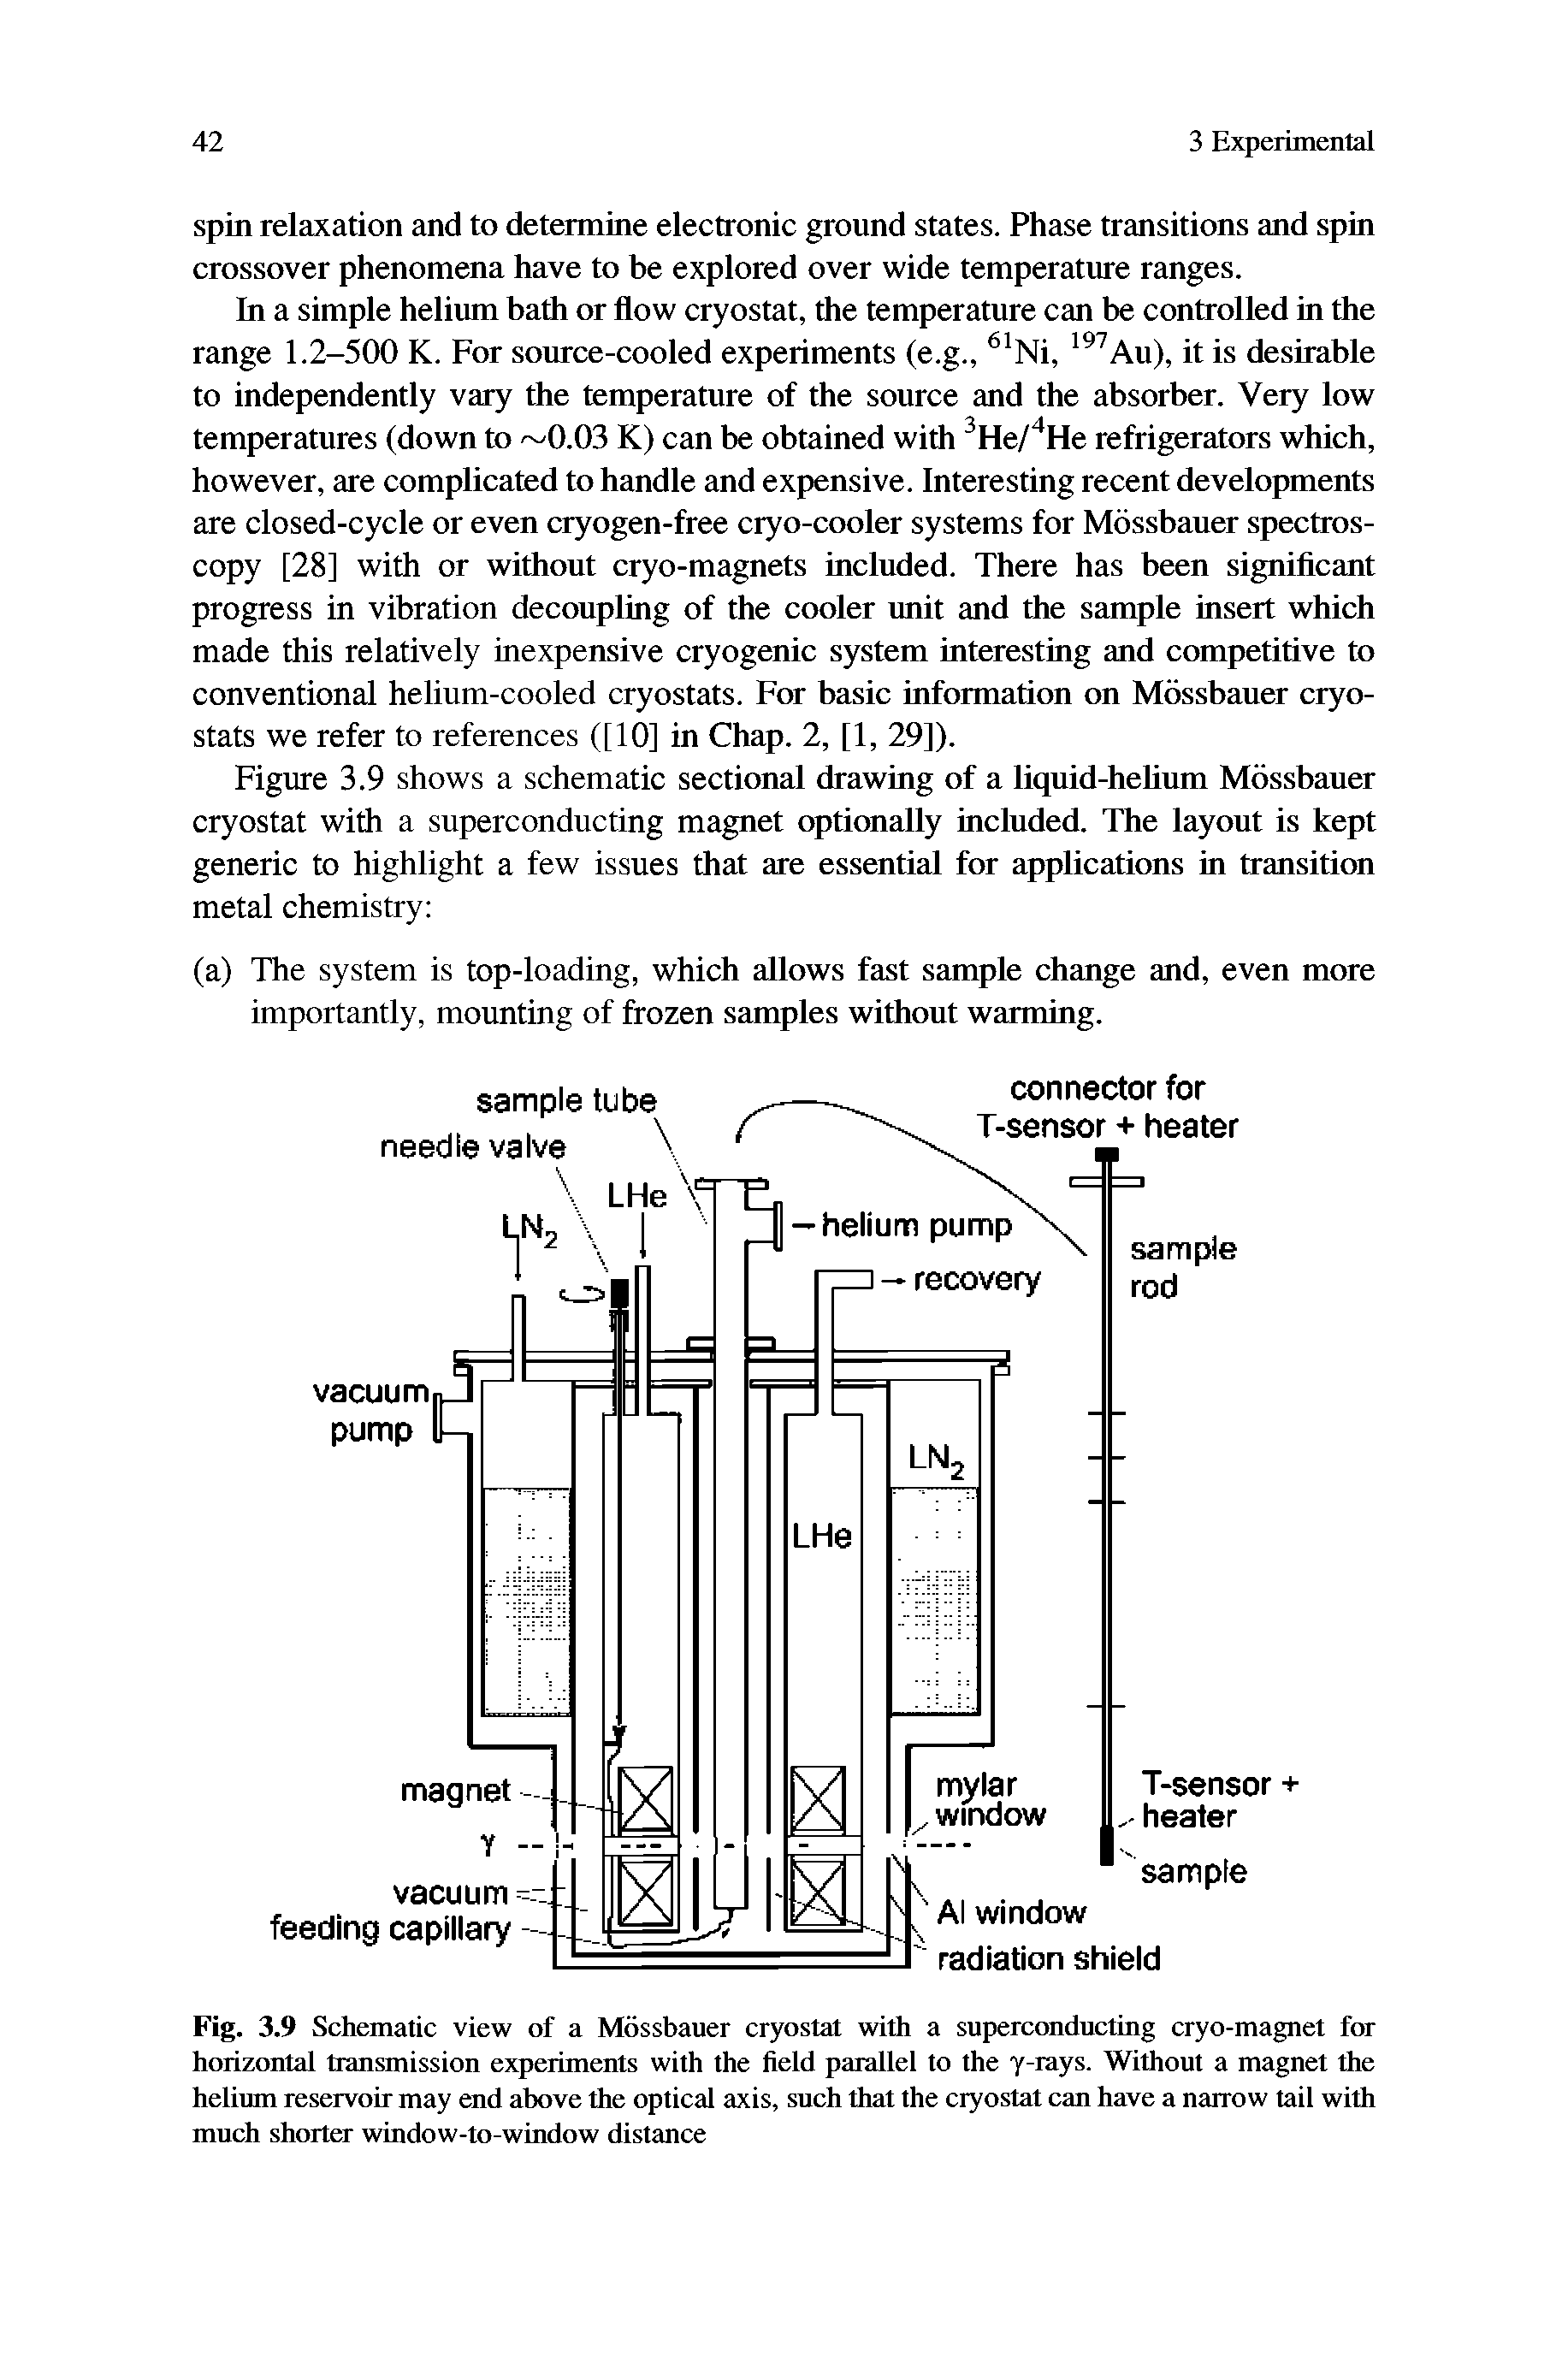 Fig. 3.9 Schematic view of a Mbssbauer cryostat with a superconducting cryo-magnet for horizontal transmission experiments with the field parallel to the y-rays. Without a magnet the helium reservoir may end above the optical axis, such that the cryostat can have a narrow tail with much shorter window-to-window distance...